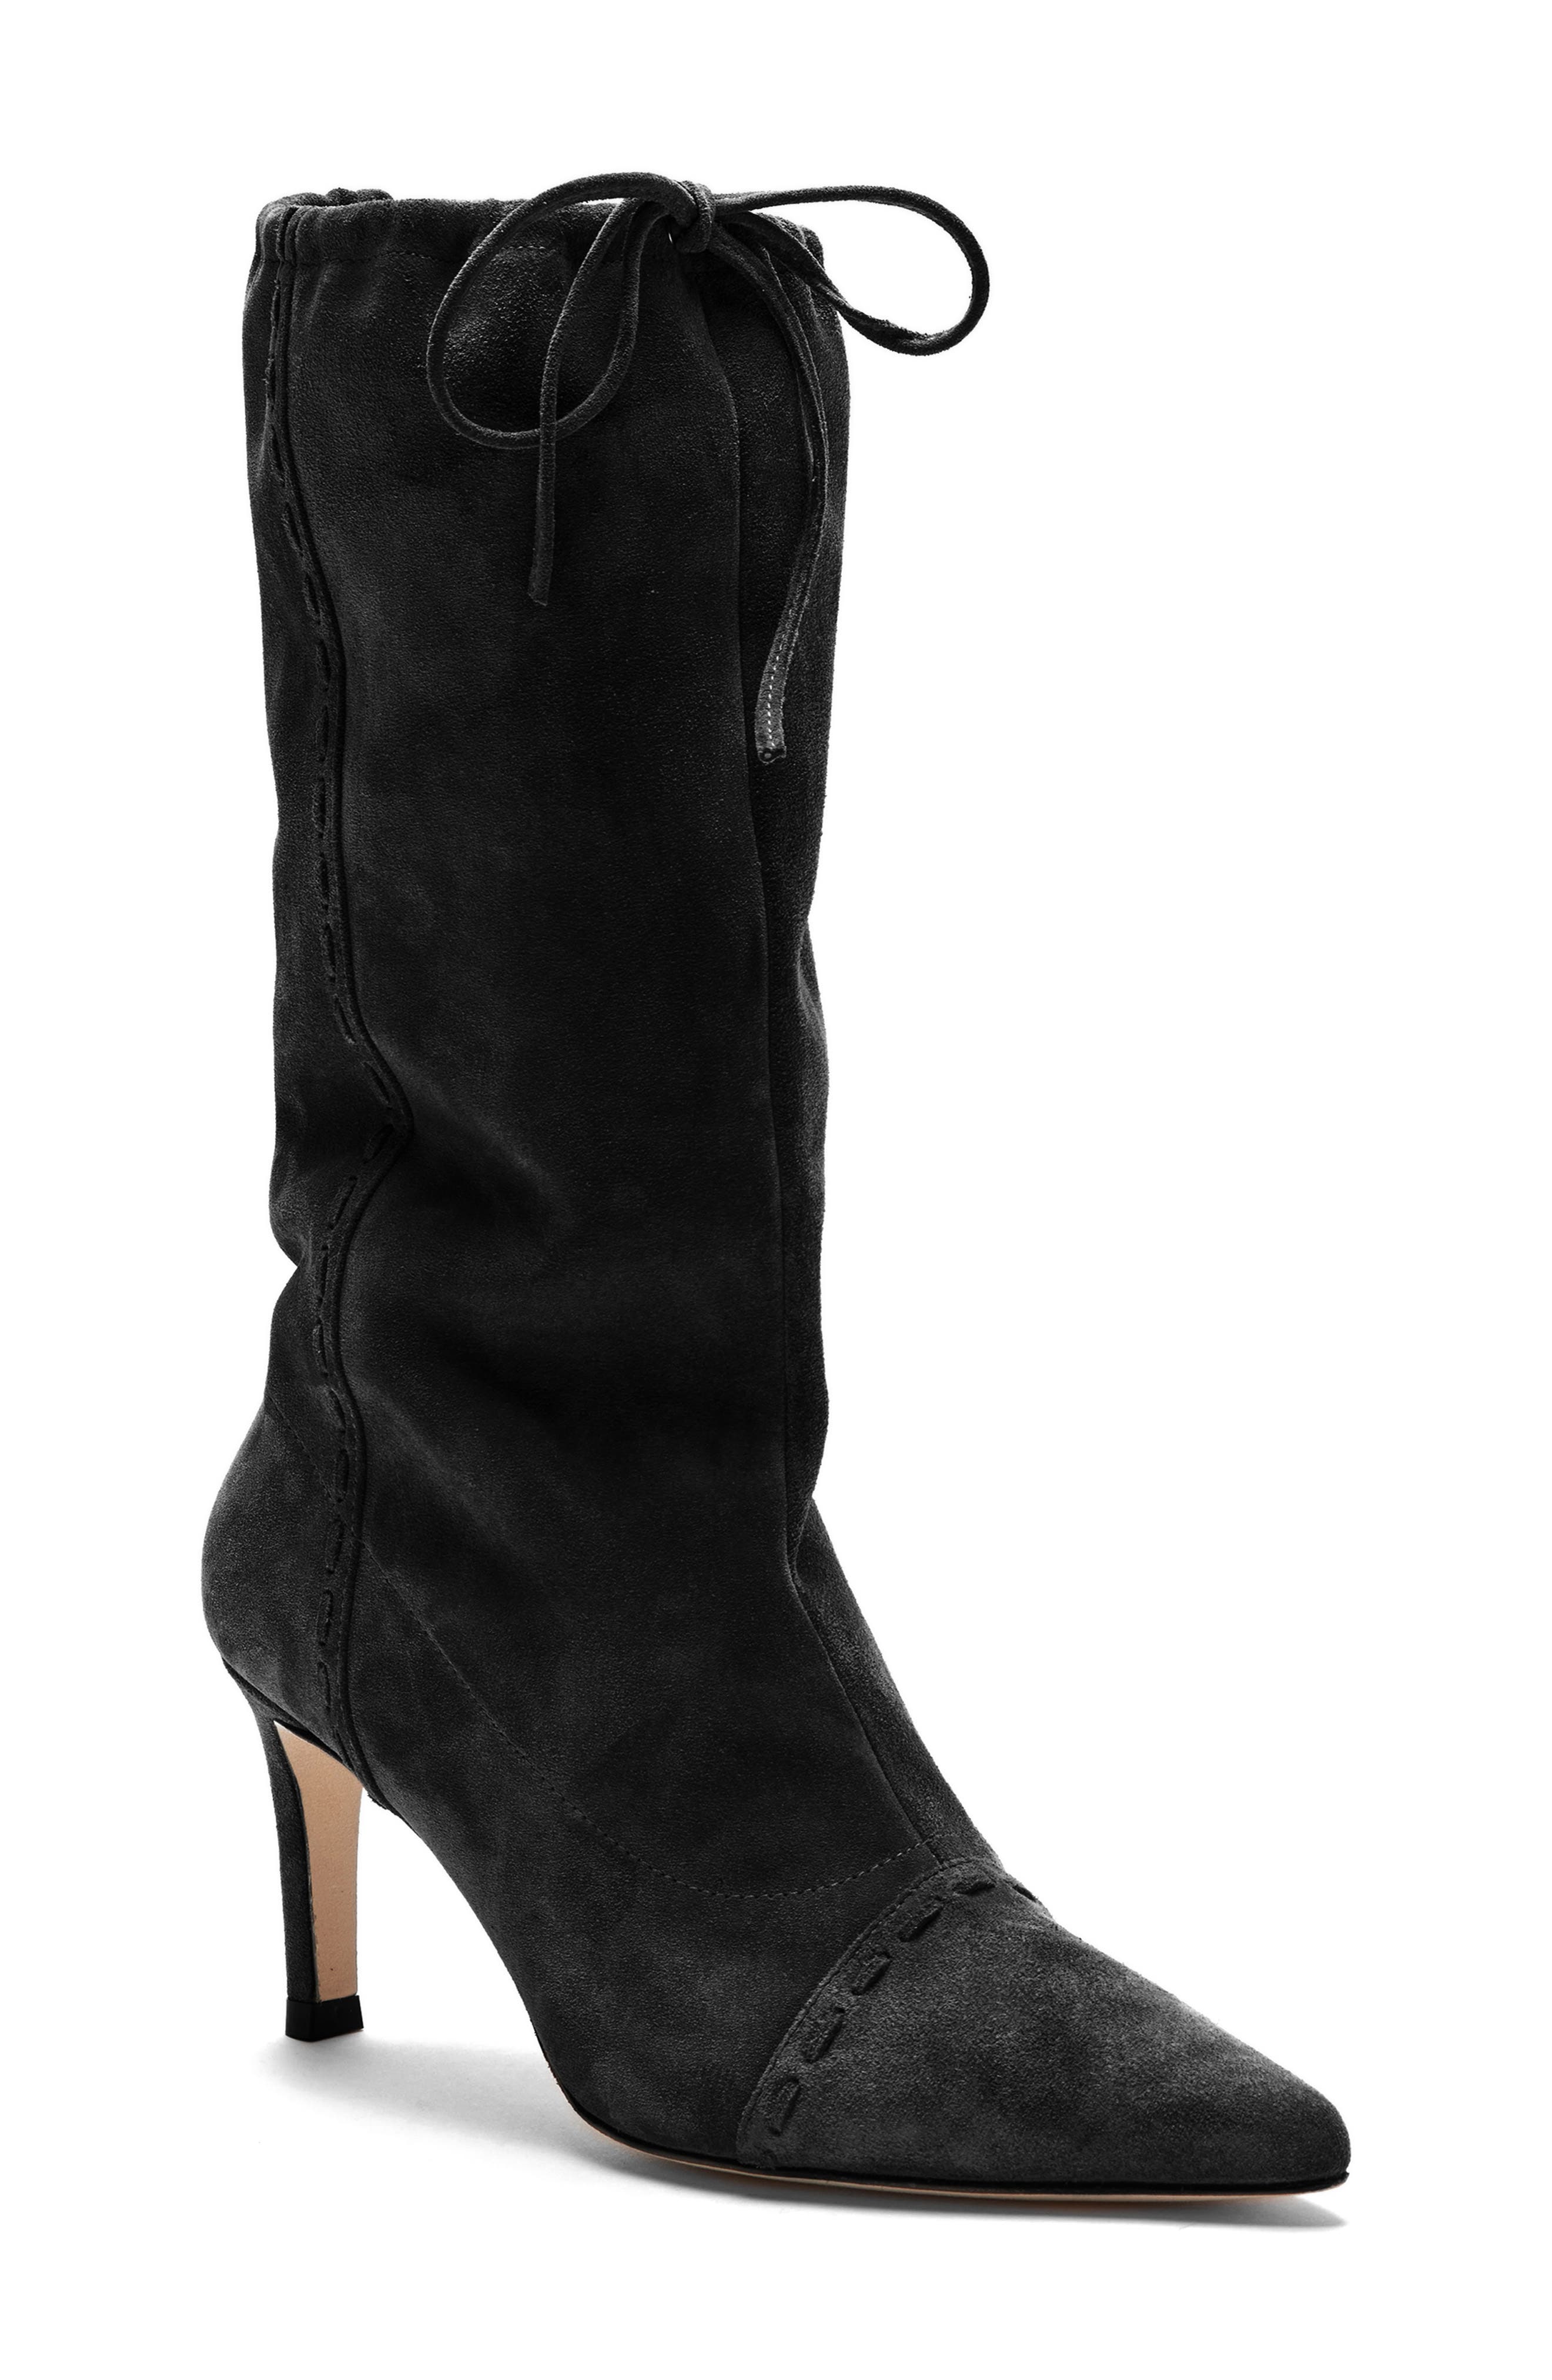 nordstrom slouch boots